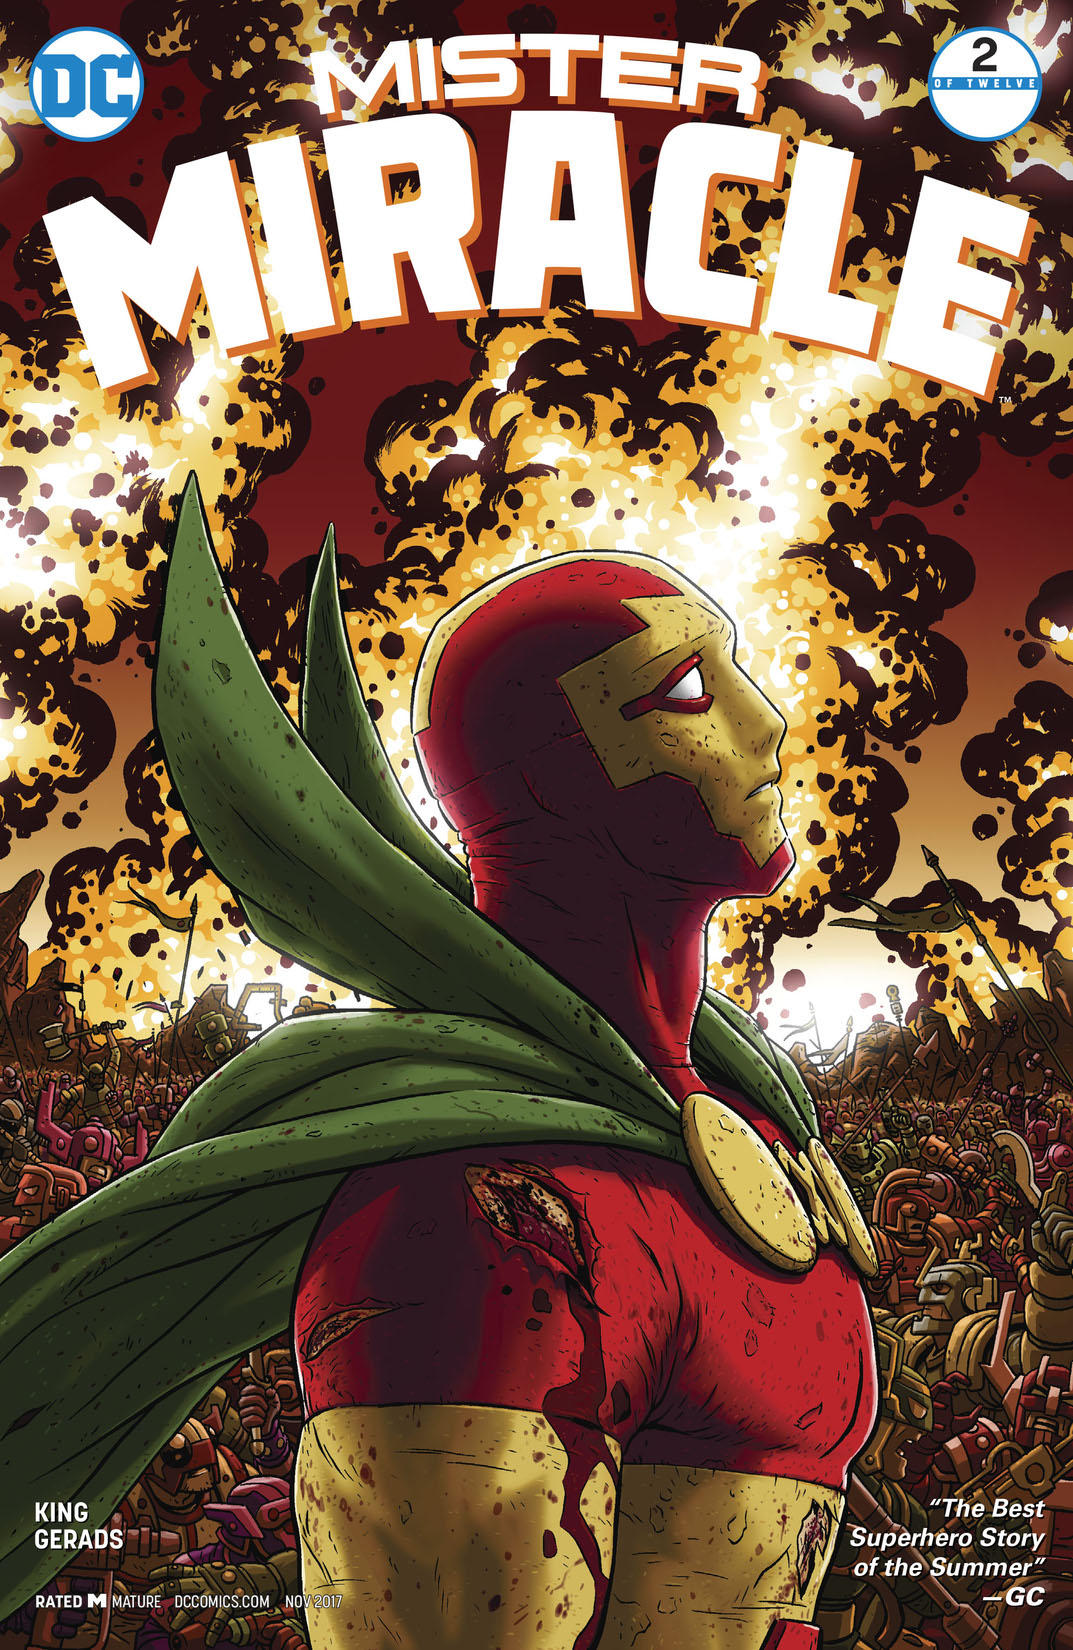 Mister Miracle (2017-) #2 preview images